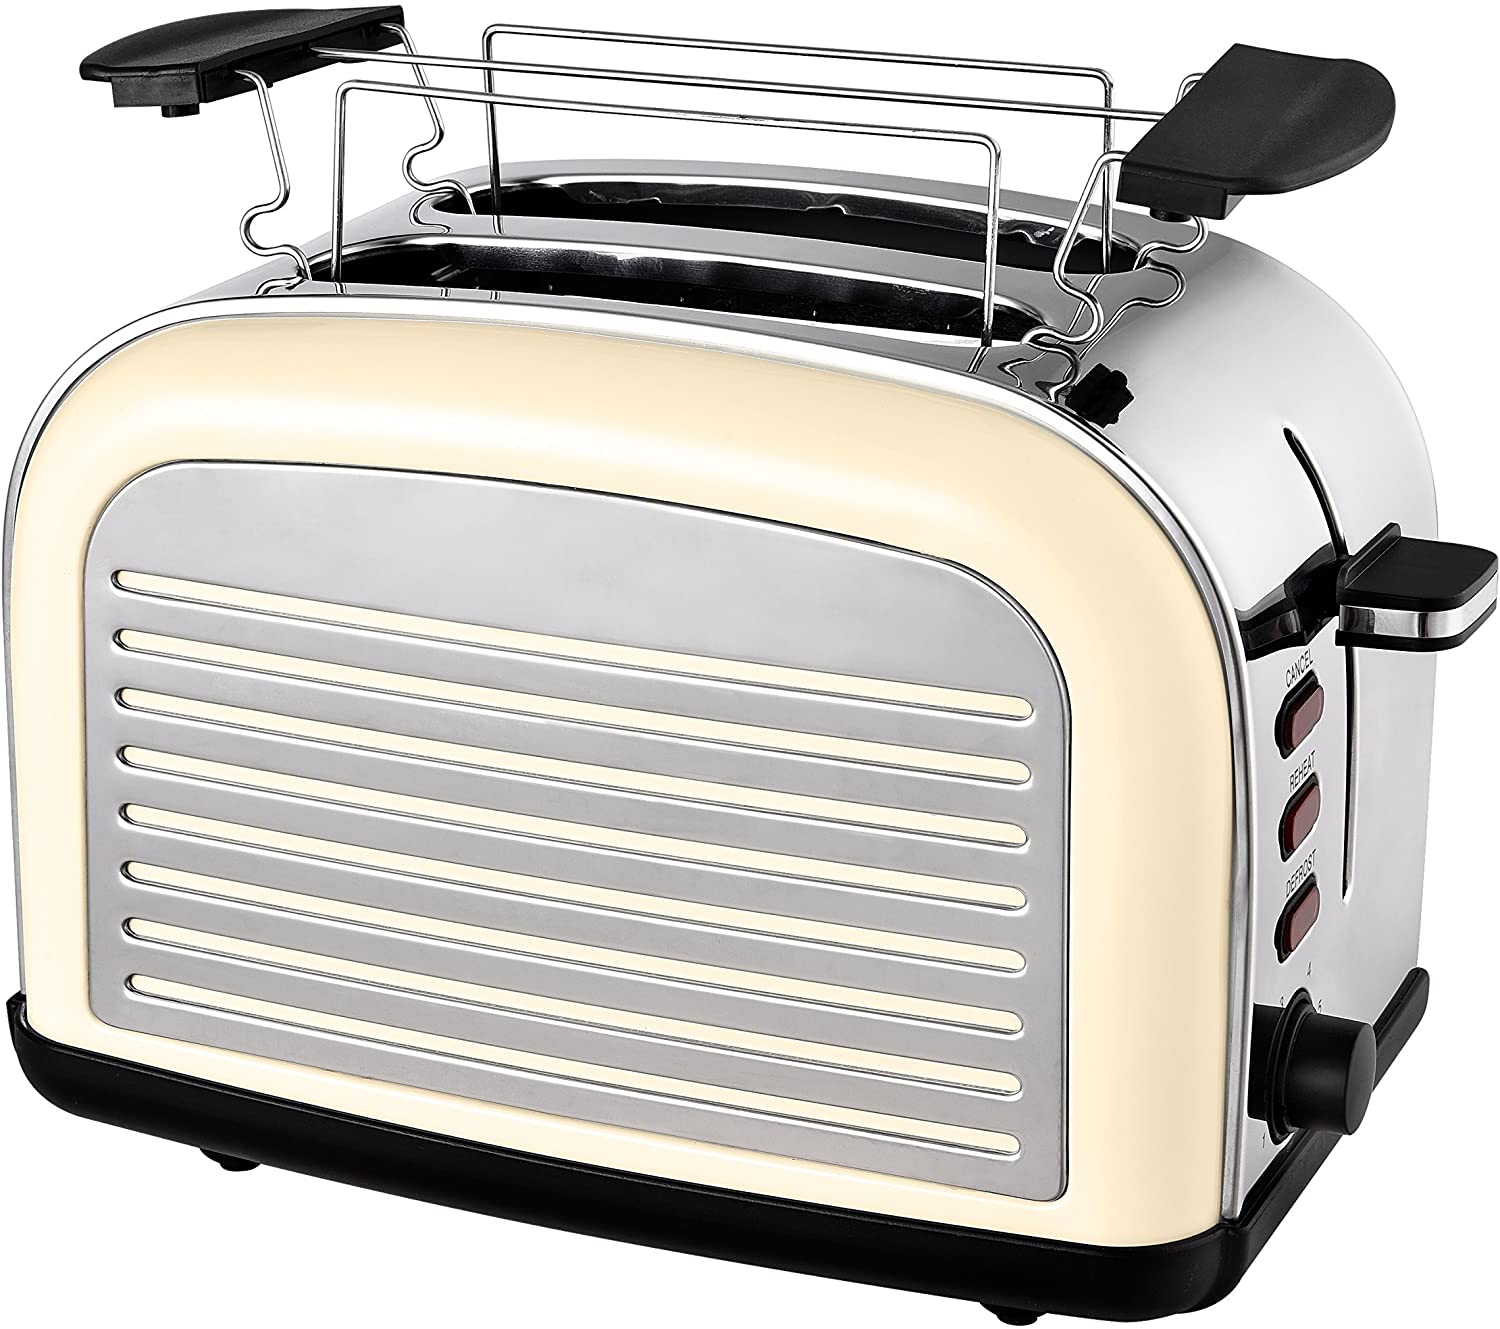 Kalorik 1050W Stainless Steel Retro Toaster with Bun Attachment and Defrosting / Warming Function